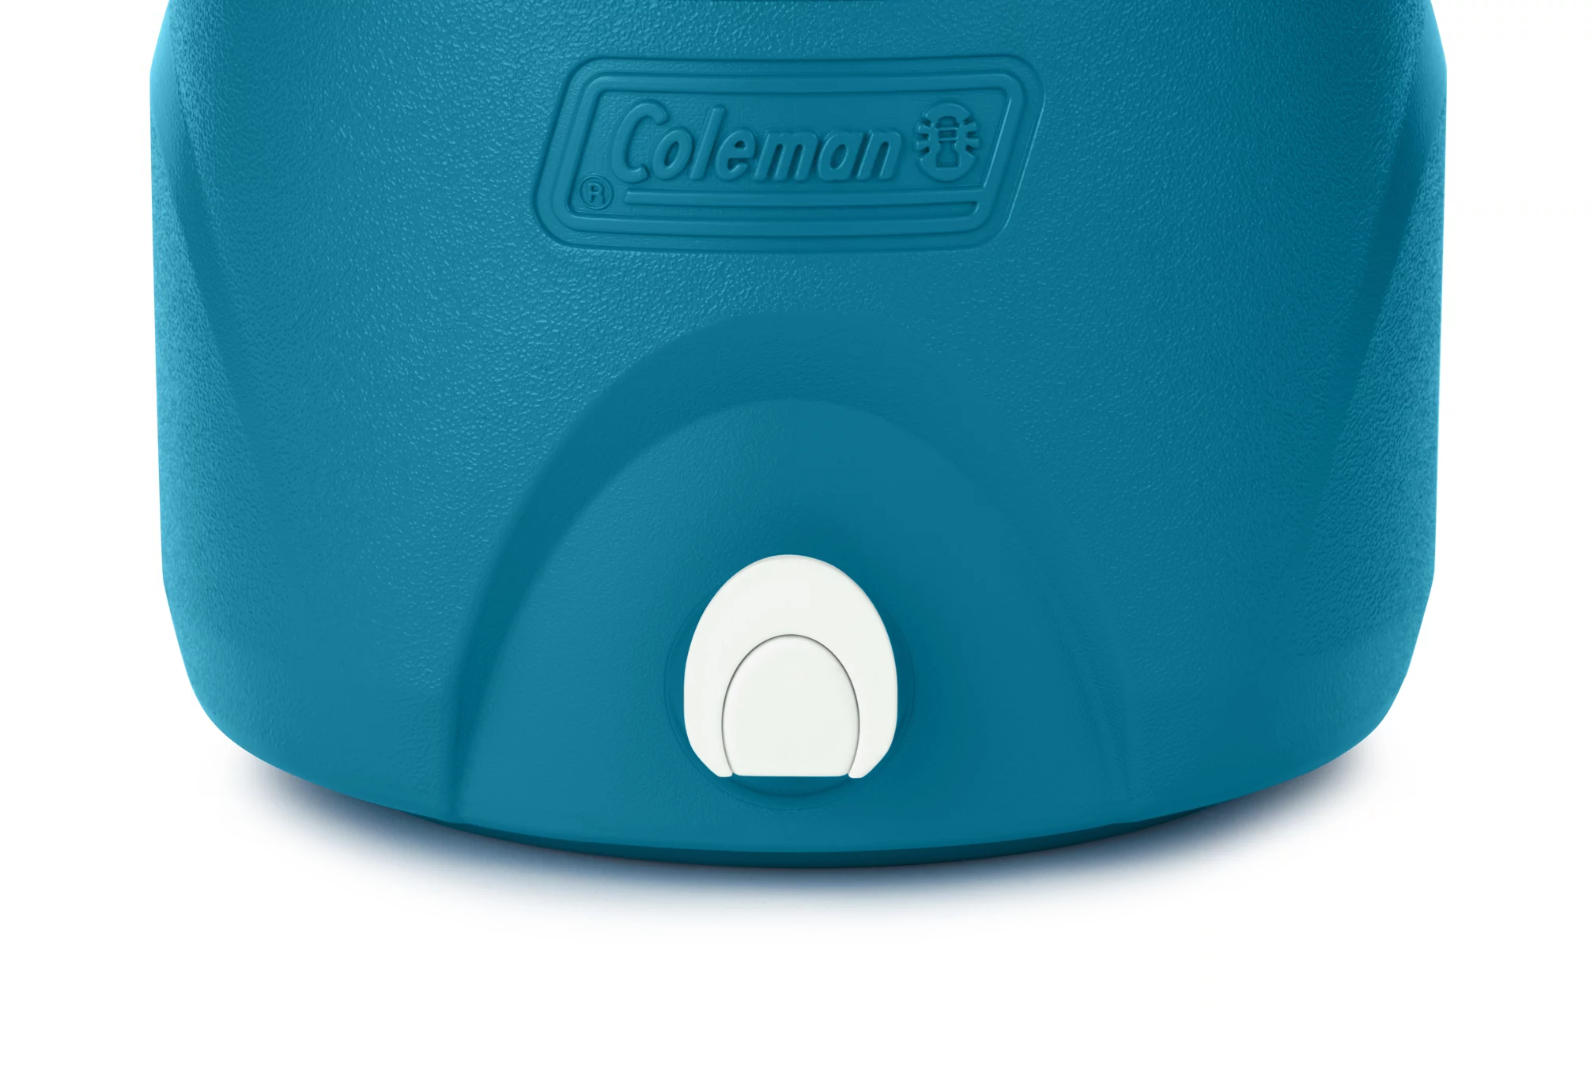 https://colemanmexico.com/wp-content/uploads/2022/06/Termo-chiller-galon-2-azul-04.png